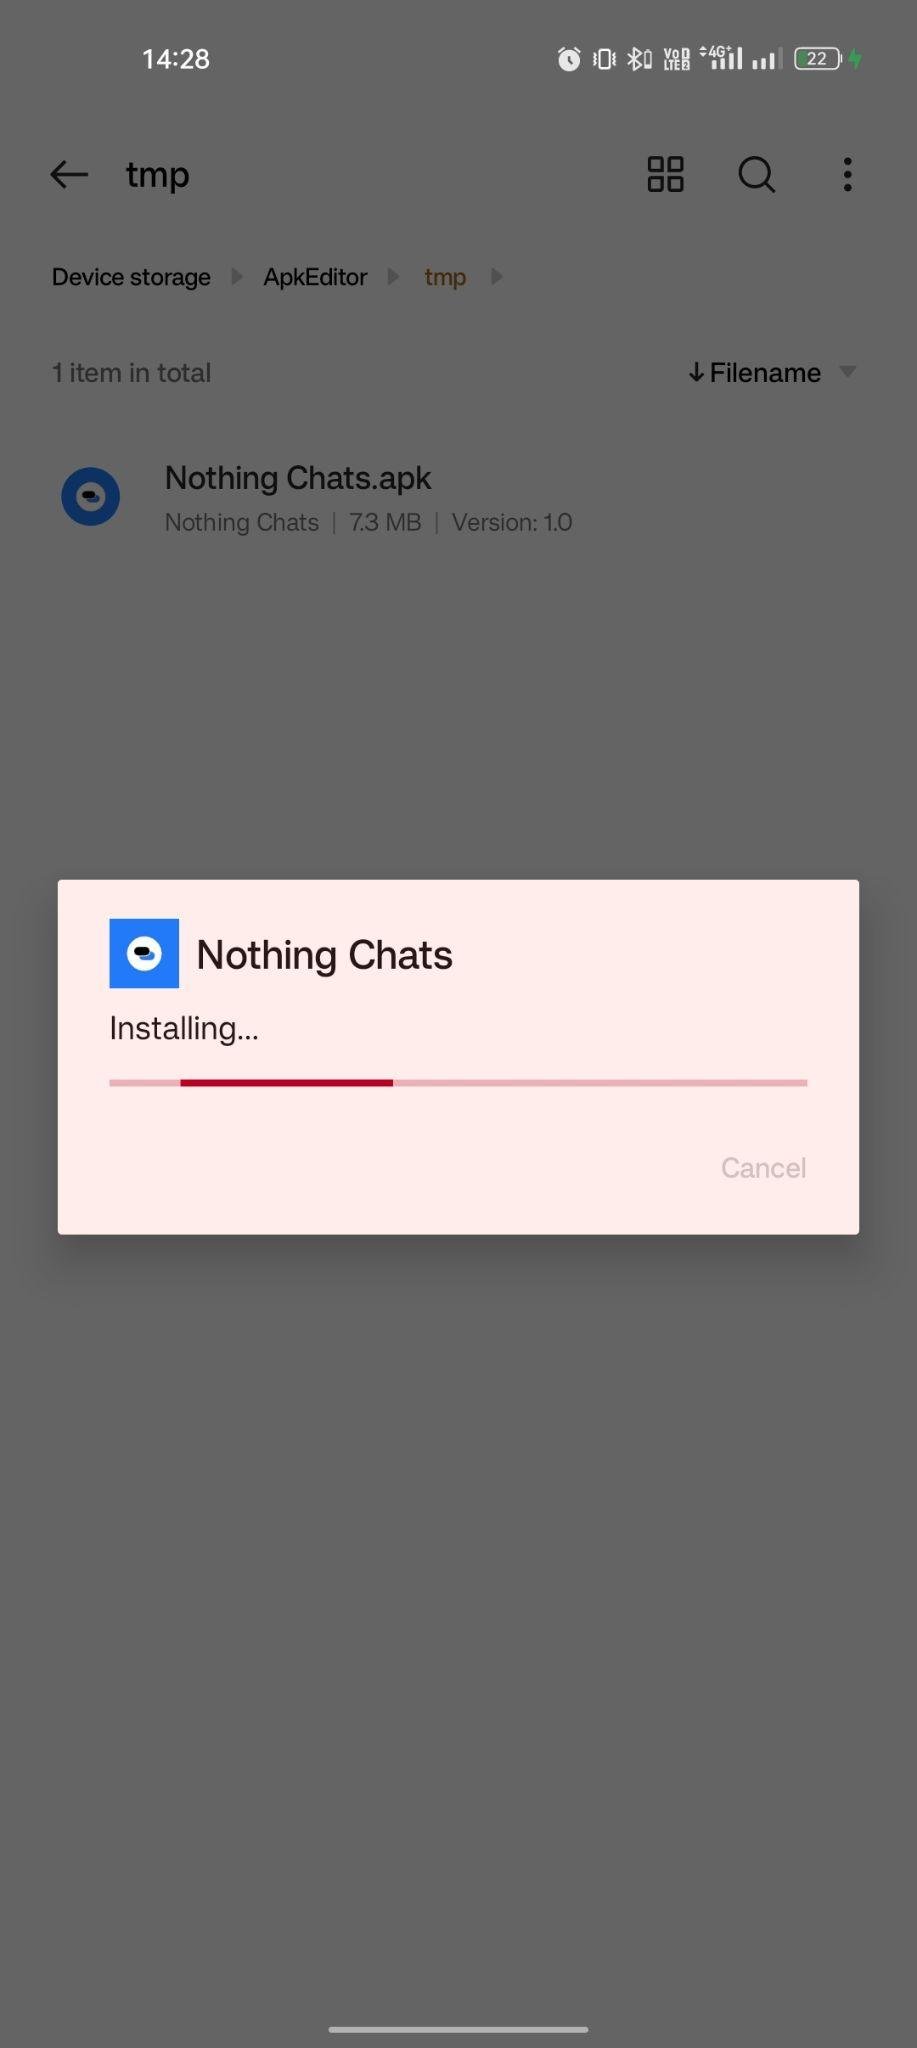 Nothing Chats apk installing